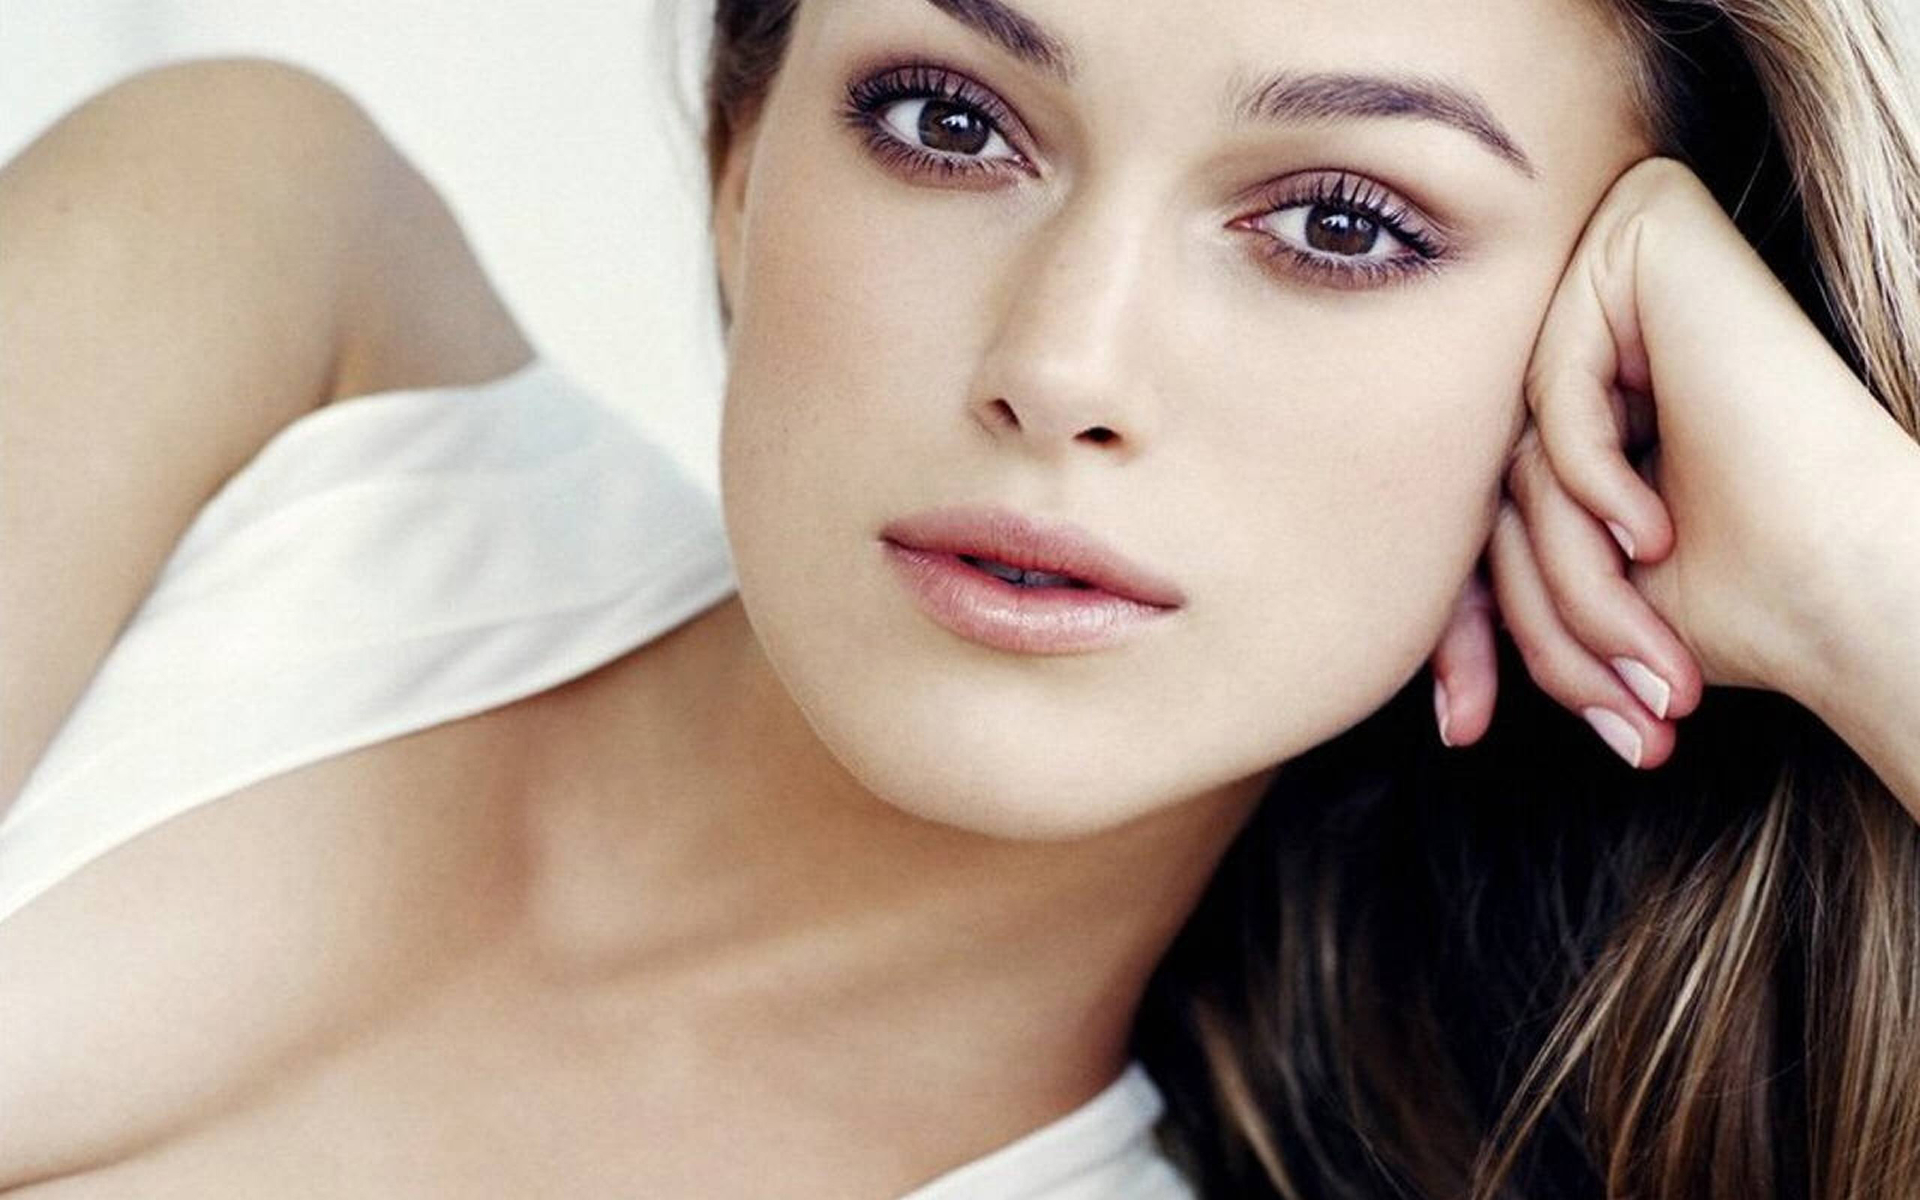 8k Keira Knightley Images